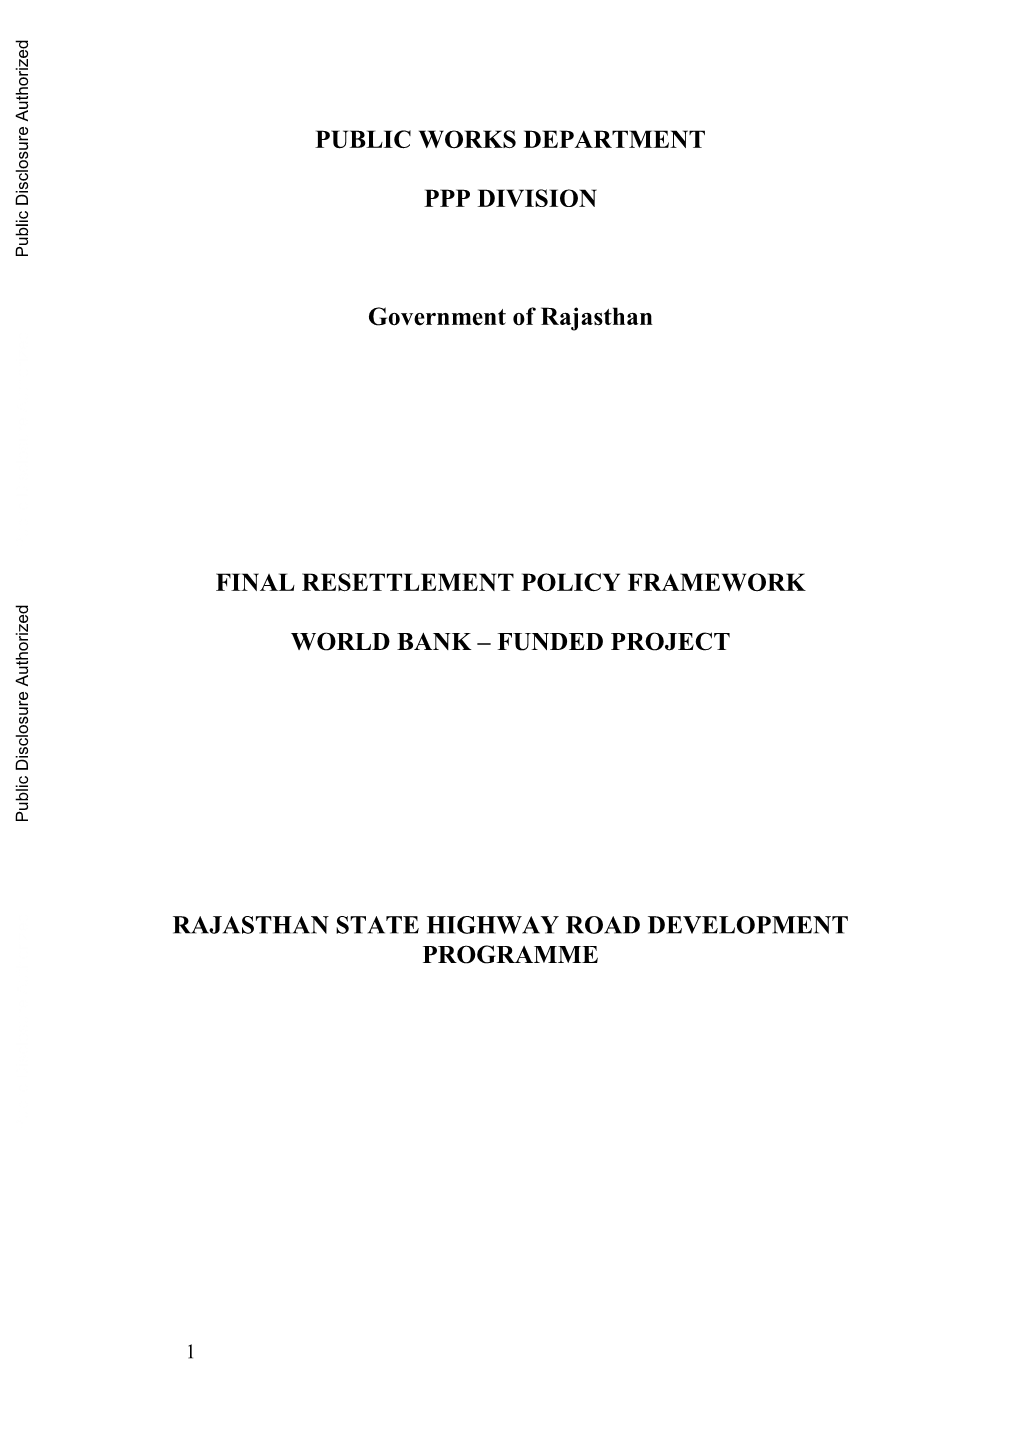 Summary of the Right to Fair Compensation and Transparency in Land Acquisition, Rehabilitation and Resettlement Act, 2013